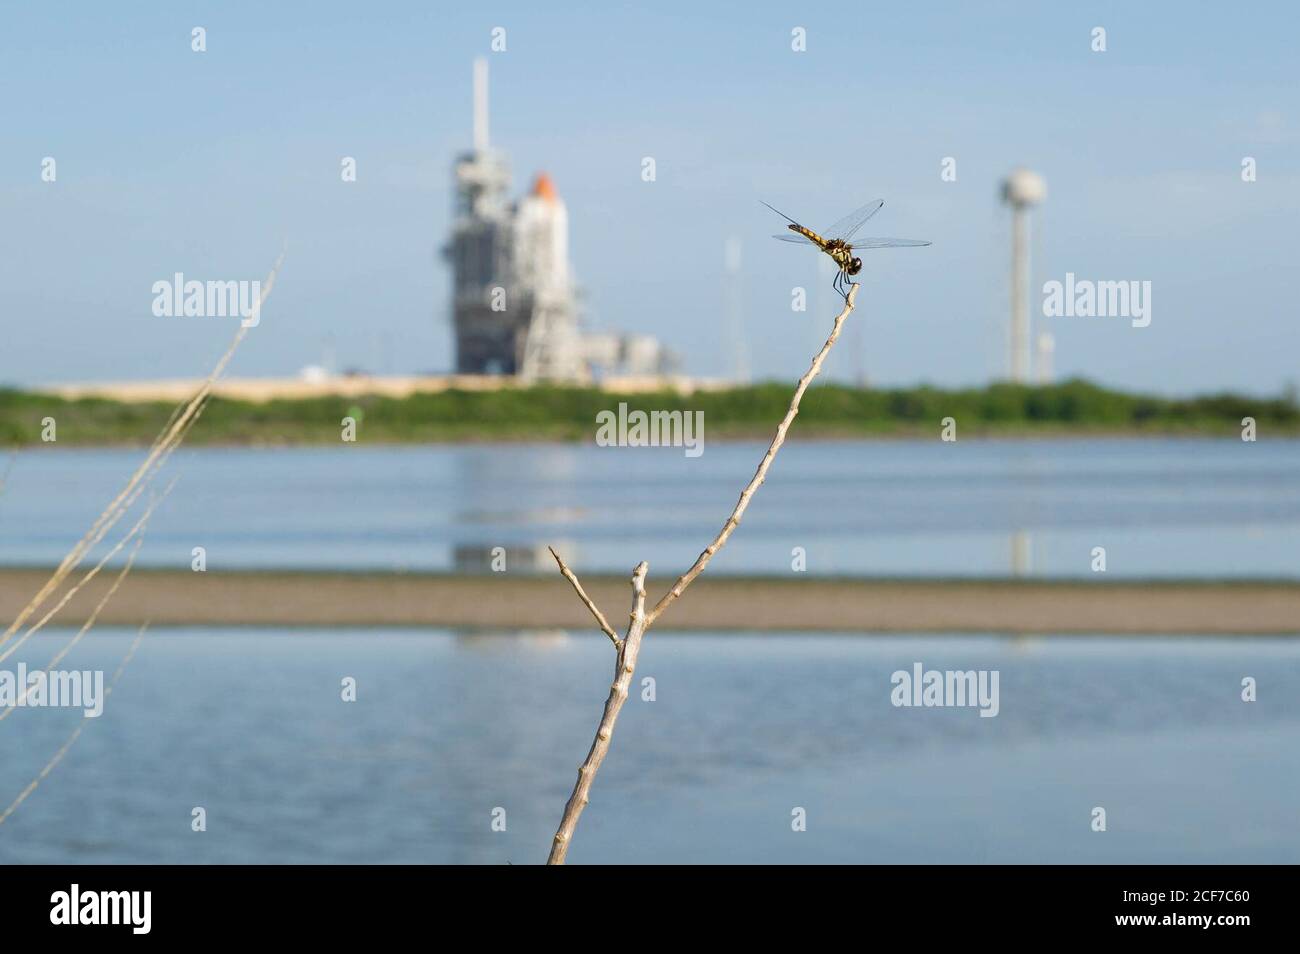 A dragonfly is seen at the edge of the lagoon near pad 39a and the space shuttle Atlantis on Wednesday, July 6, 2011 at the NASA Kennedy Space Center in Cape Canaveral, Fla.  Space shuttle Atlantis is set to liftoff Friday, July 8, on the final flight of the shuttle program, STS-135, a 12-day mission to the International Space Station.  Photo Credit: (NASA/Bill Ingalls) Stock Photo